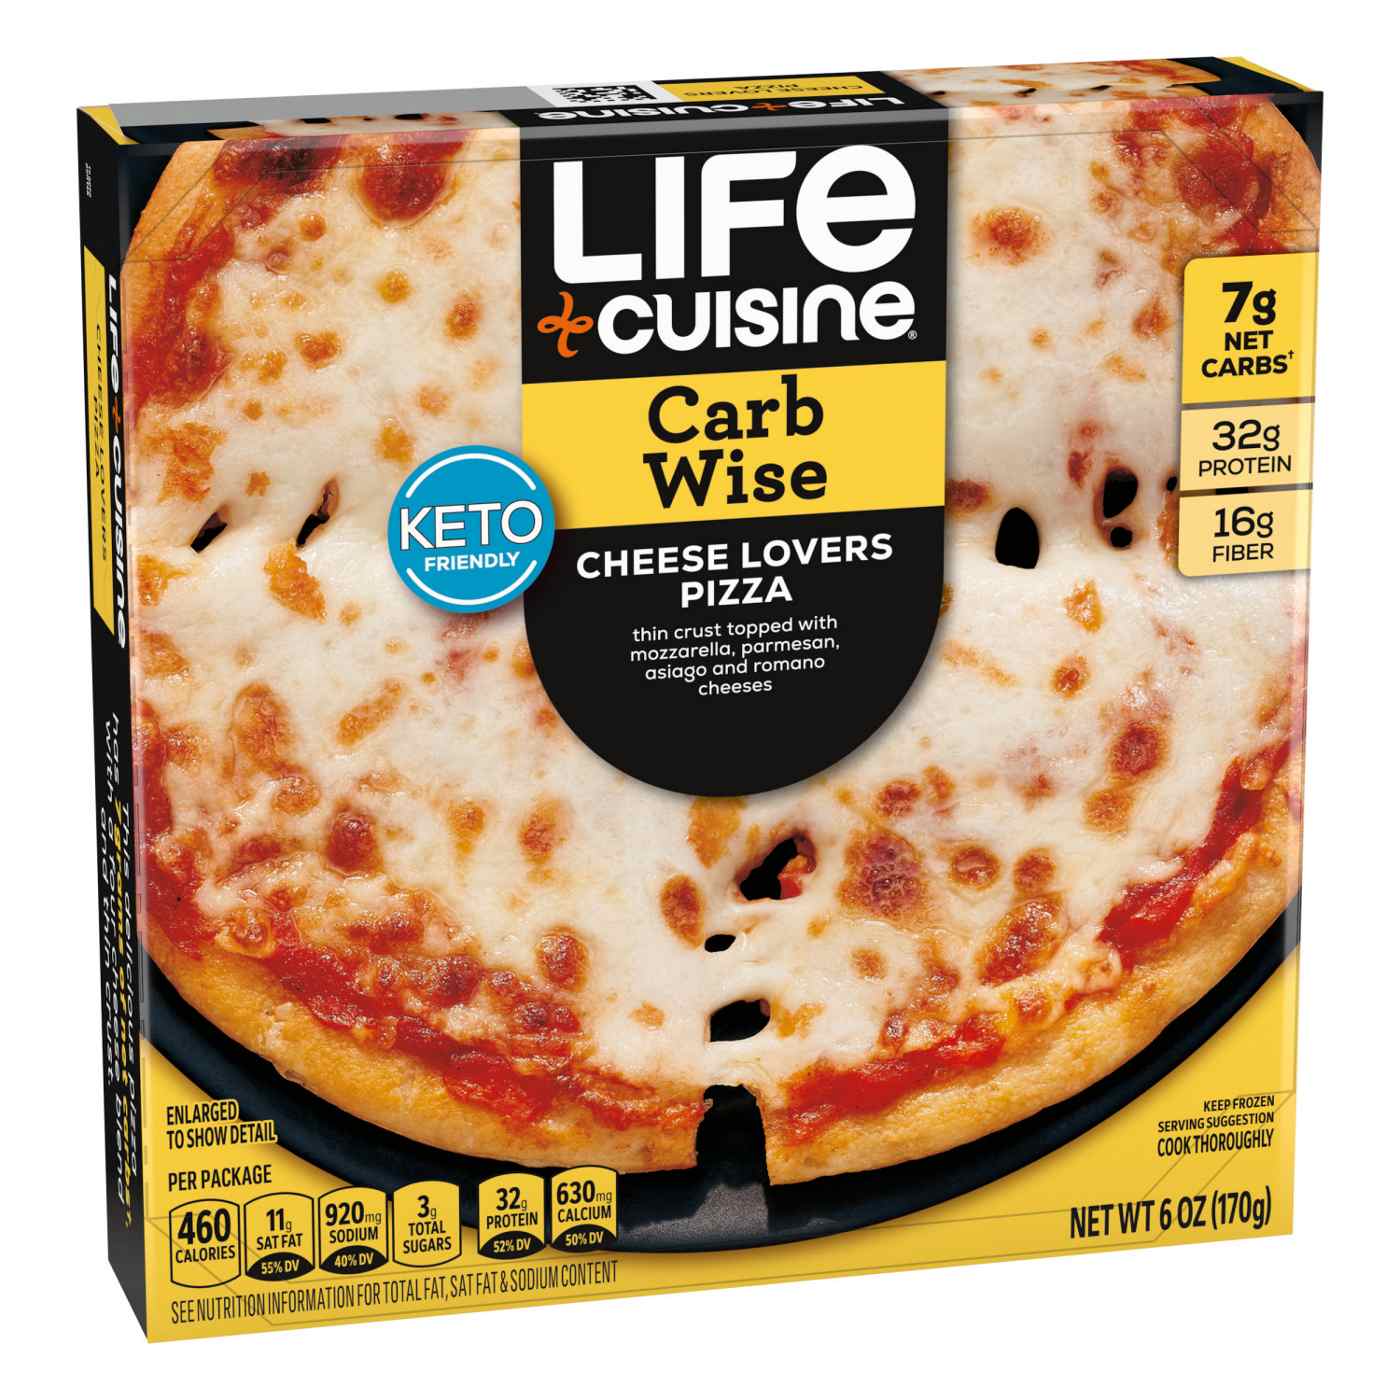 Life Cuisine Carb Wise Keto-Friendly Frozen Pizza - Cheese Lovers; image 7 of 7